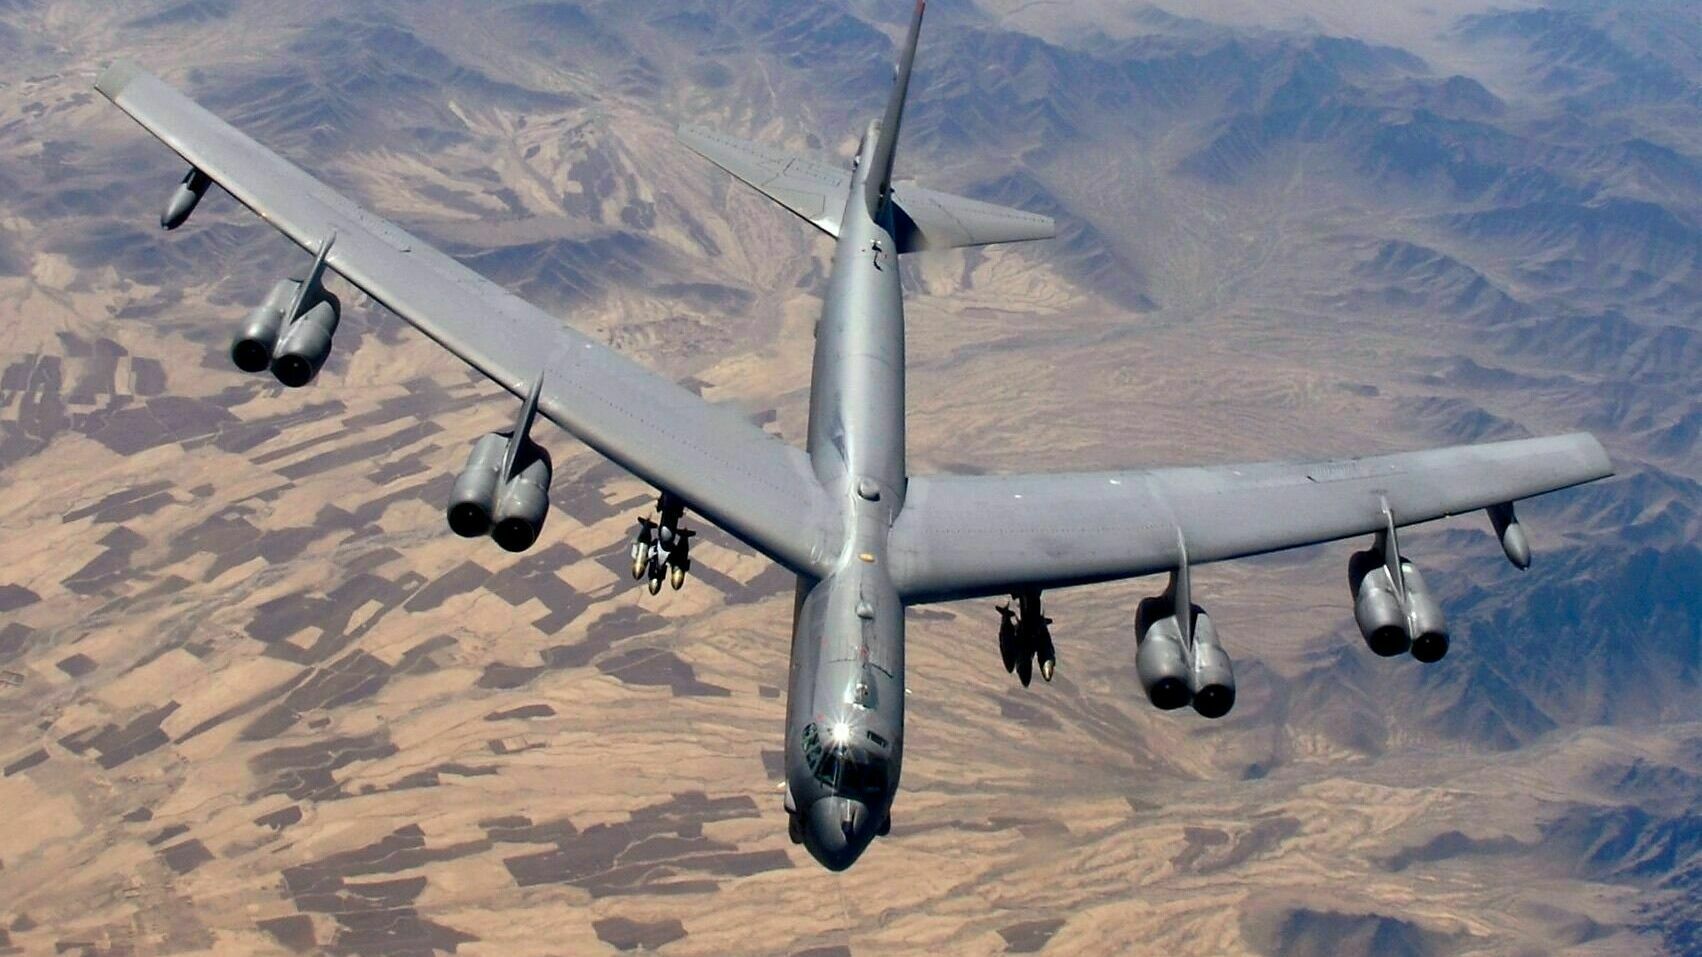 US B-52 bombers flew over the Balkans